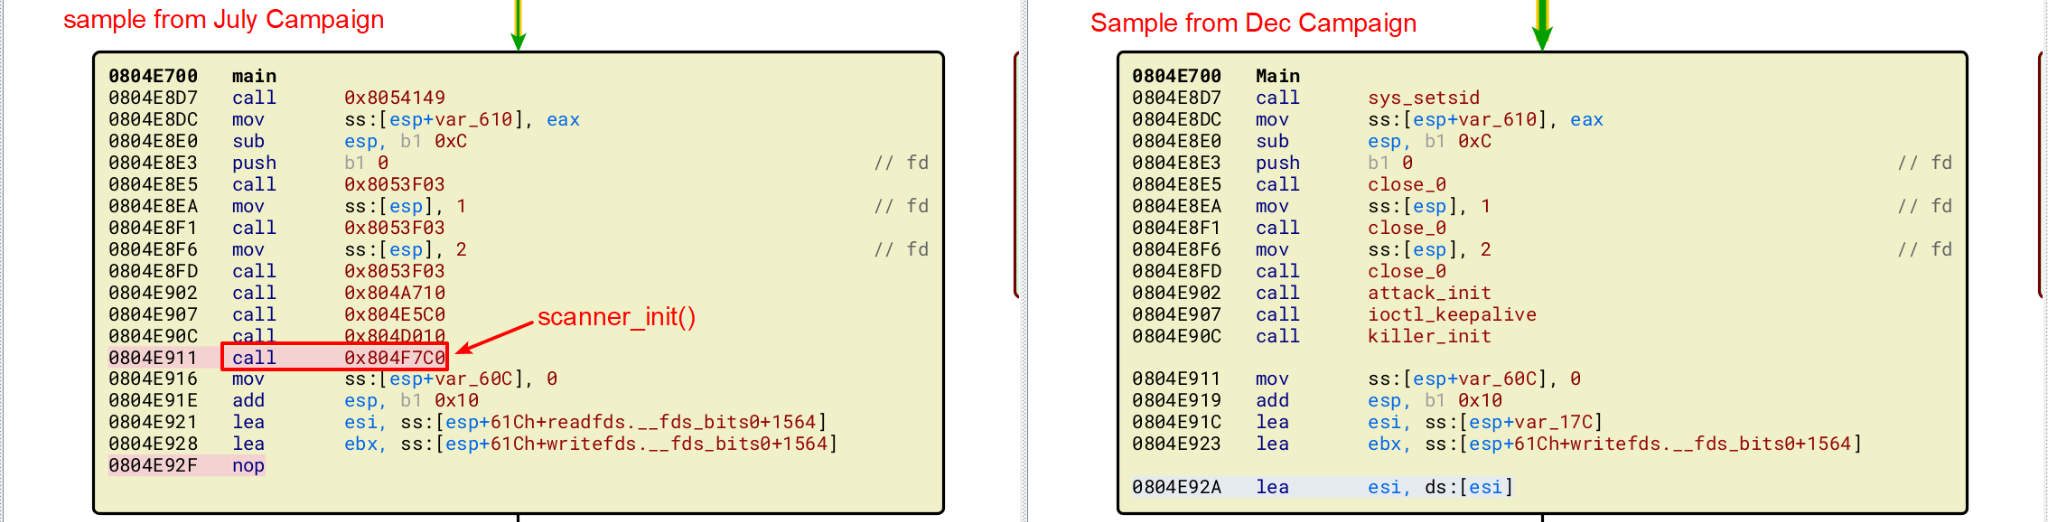 Image 10 is a sample comparison of the July and December campaigns. Highlighted in the July campaign in red with an arrow is “scanner_init()”.